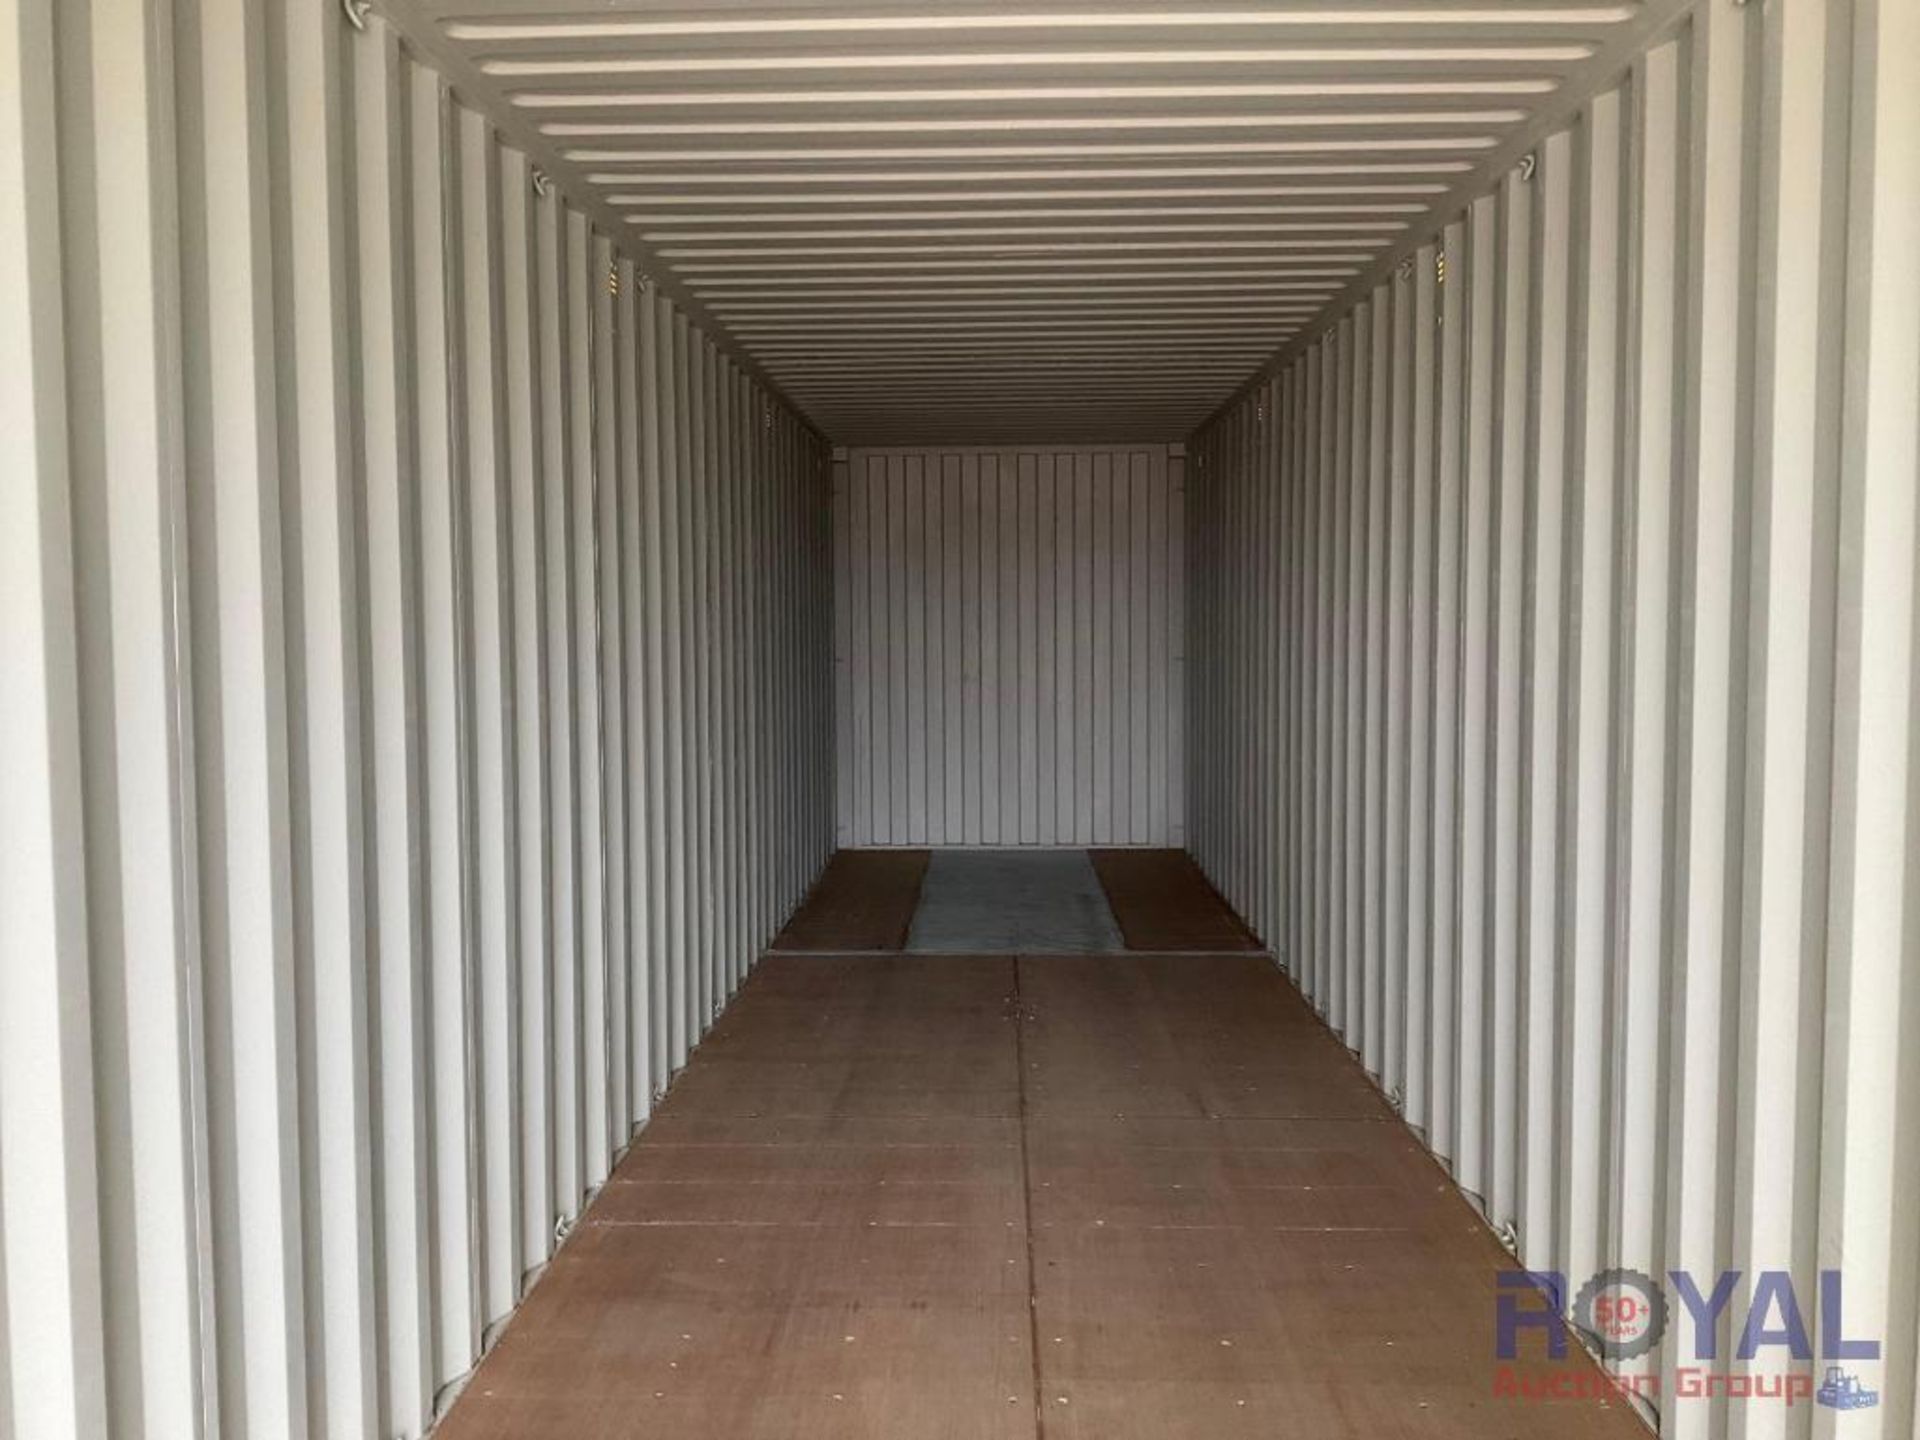 40ft One Time Use Shipping Container - Image 8 of 8